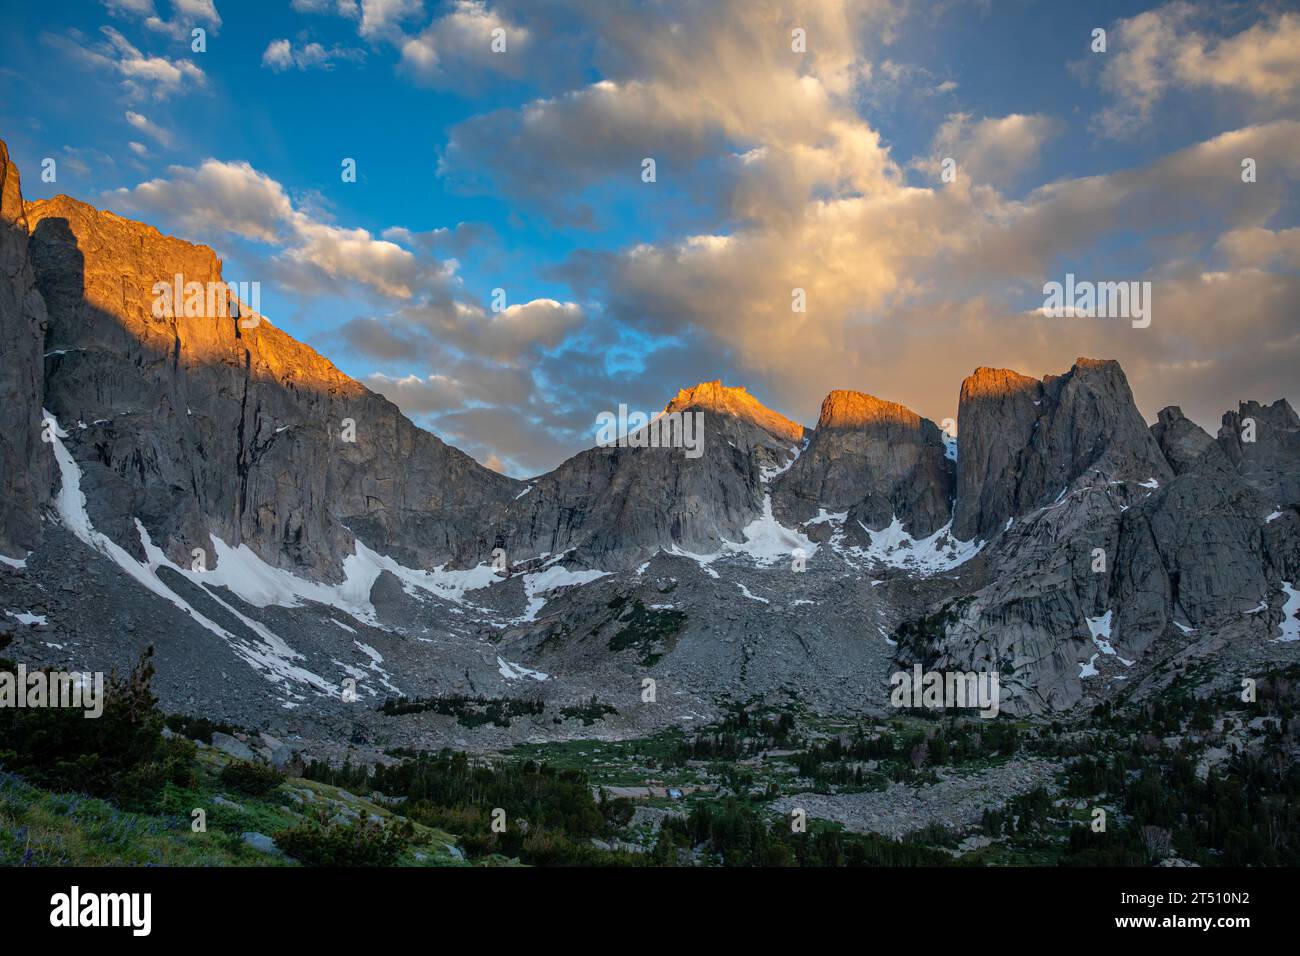 WY05586-00...WYOMING - Sunrise in the Cirque of the Towers area of the Popo Agie Wilderness section of the Wind River Range. Stock Photo